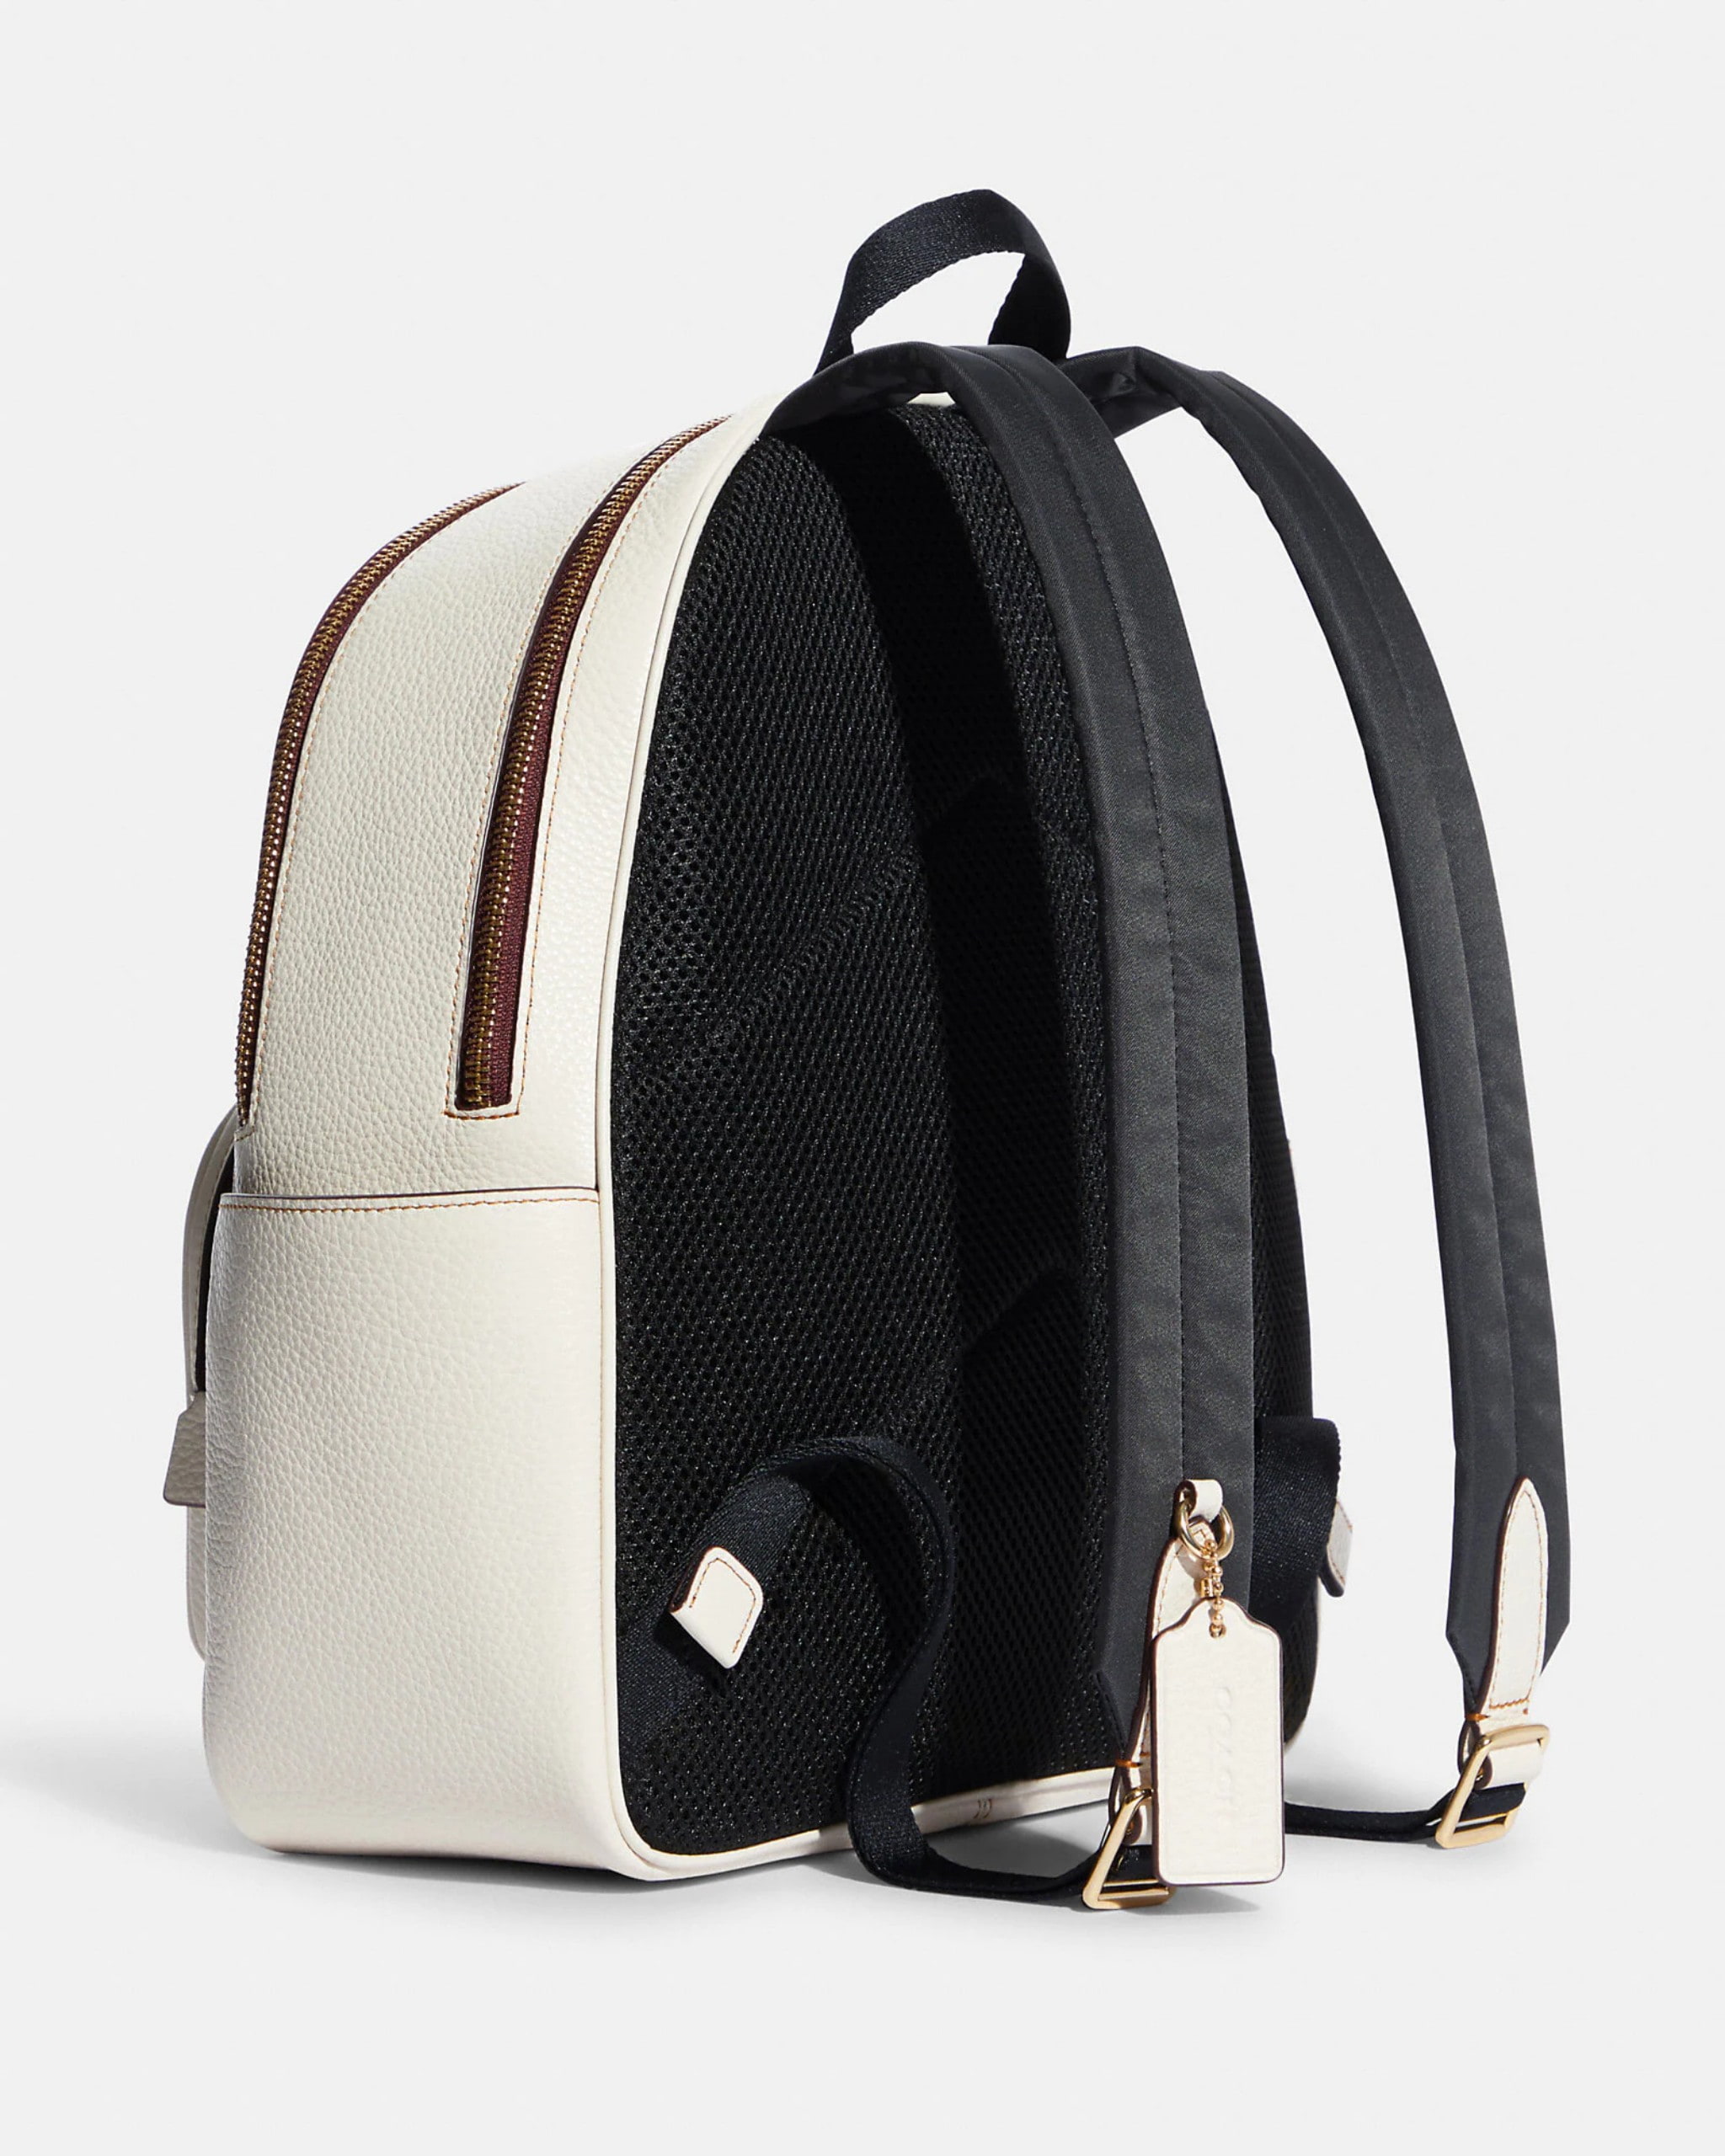 BALO NỮ COACH COURT BACKPACK IN SIGNATURE CANVAS WITH TIGER 4